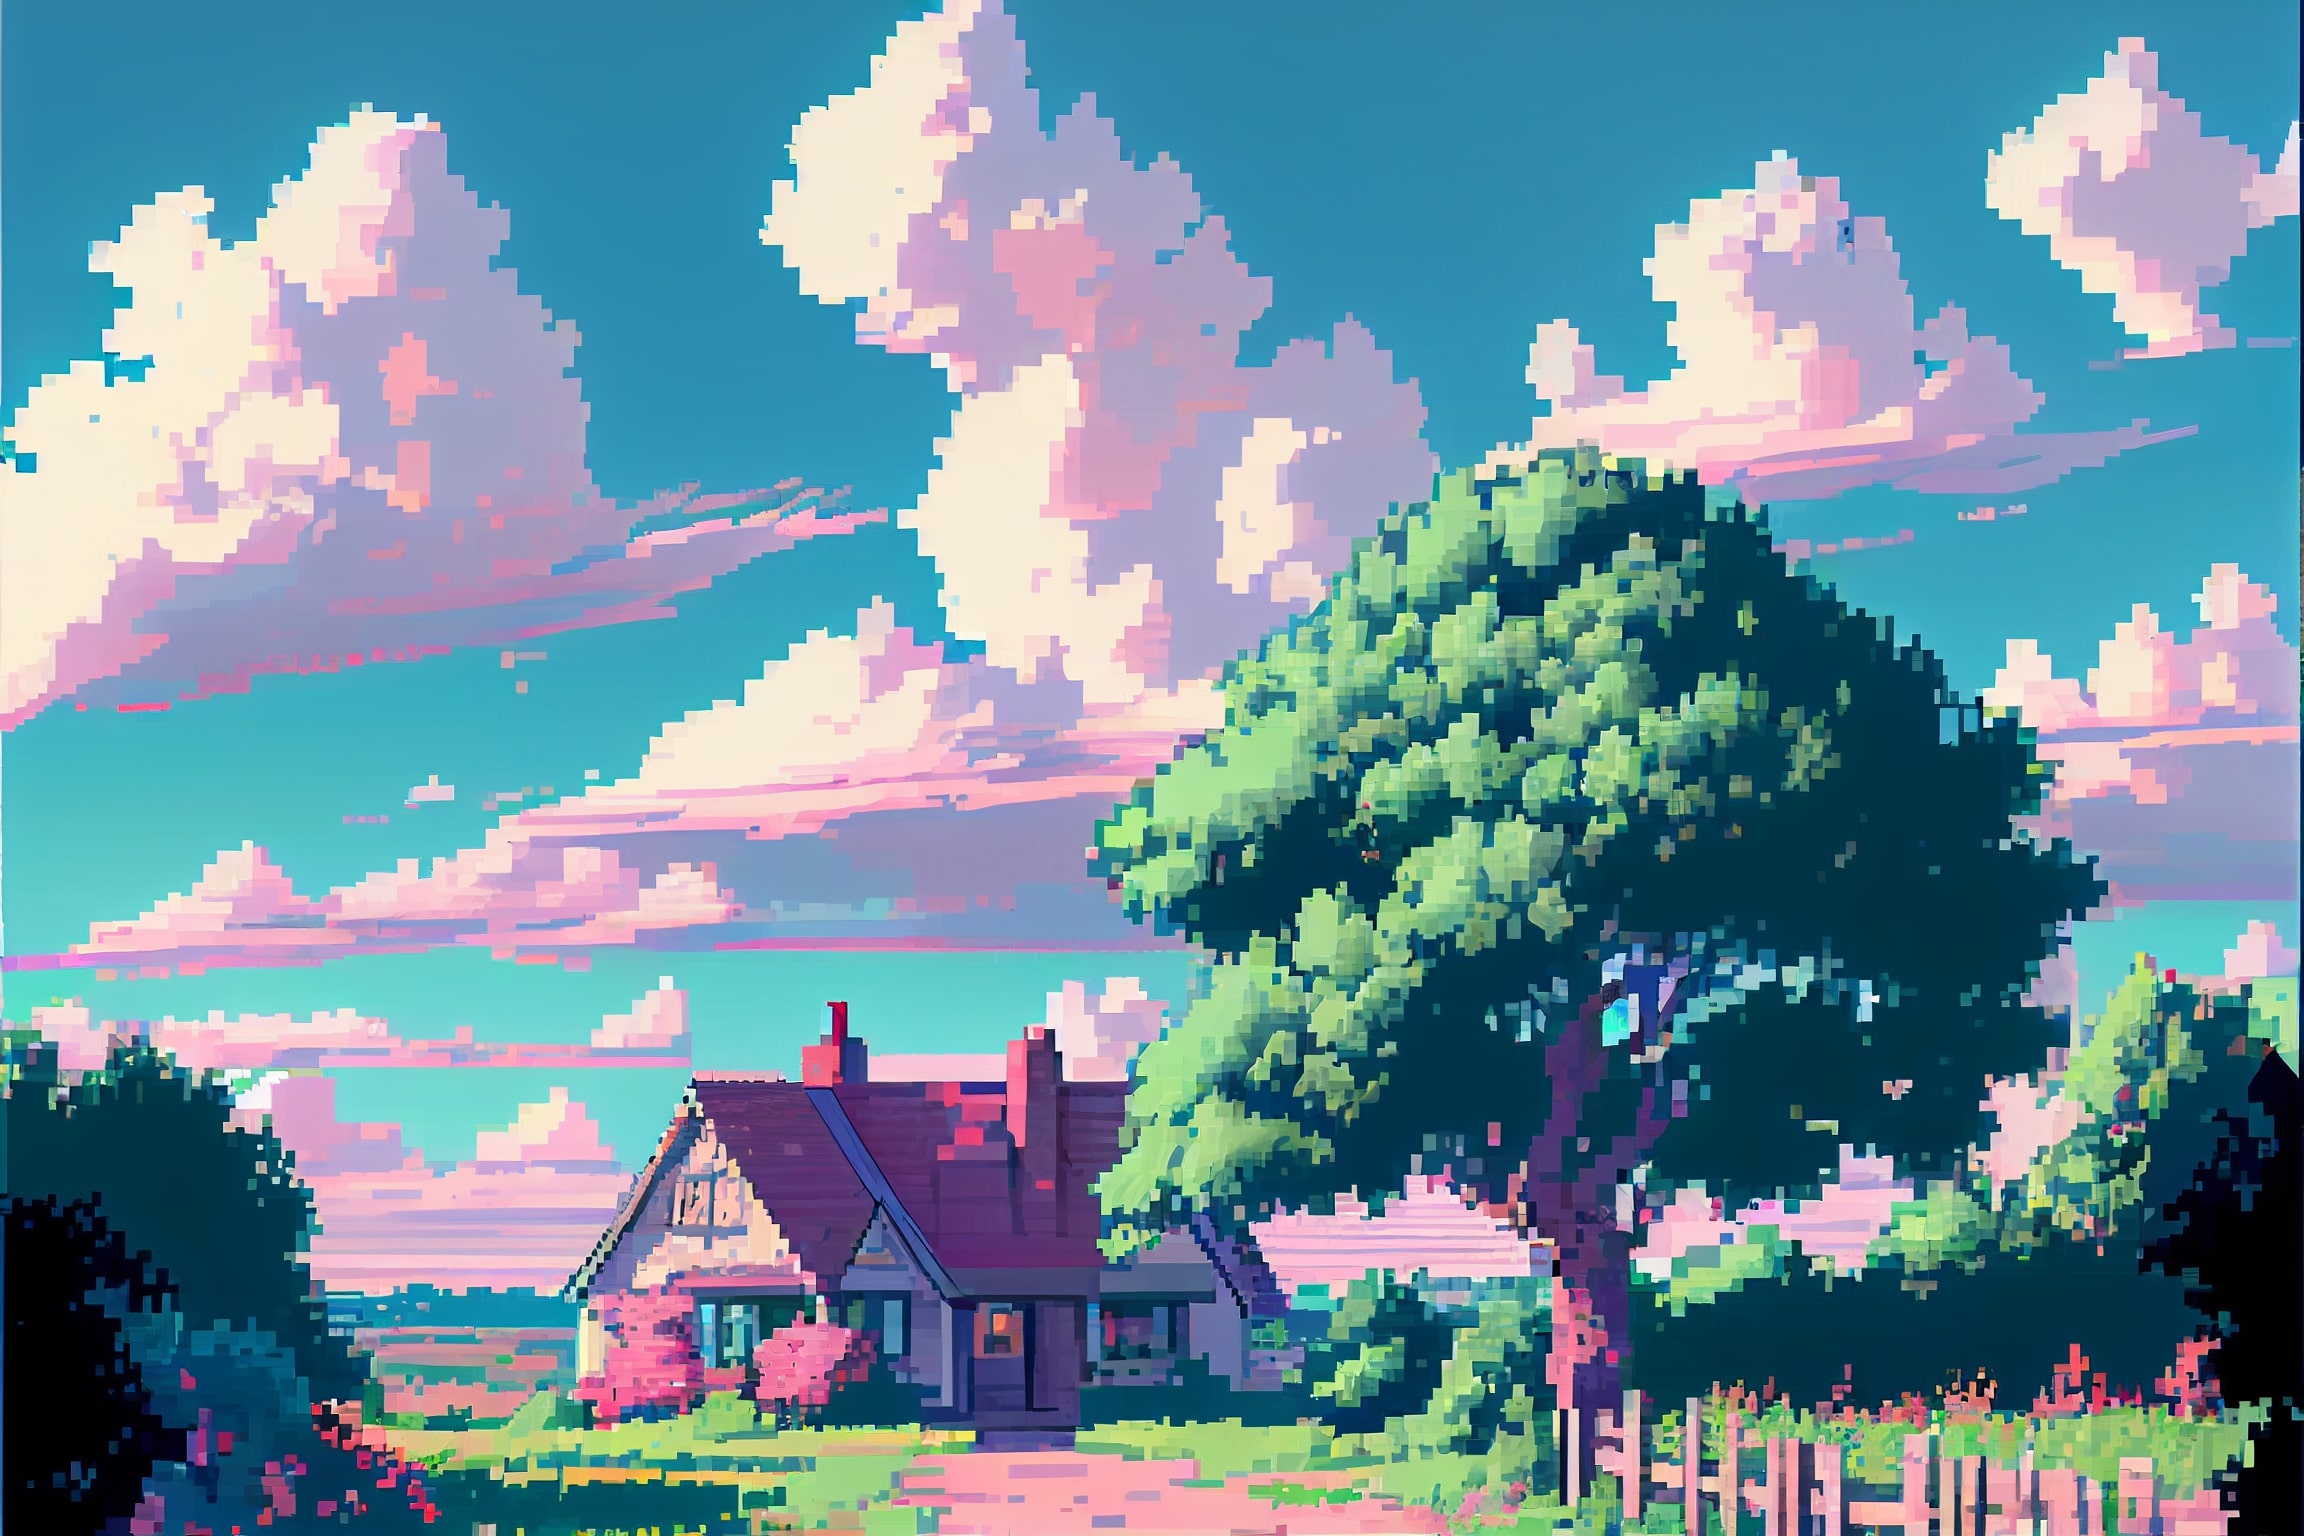 Pixel art picture of a house in the countryside.